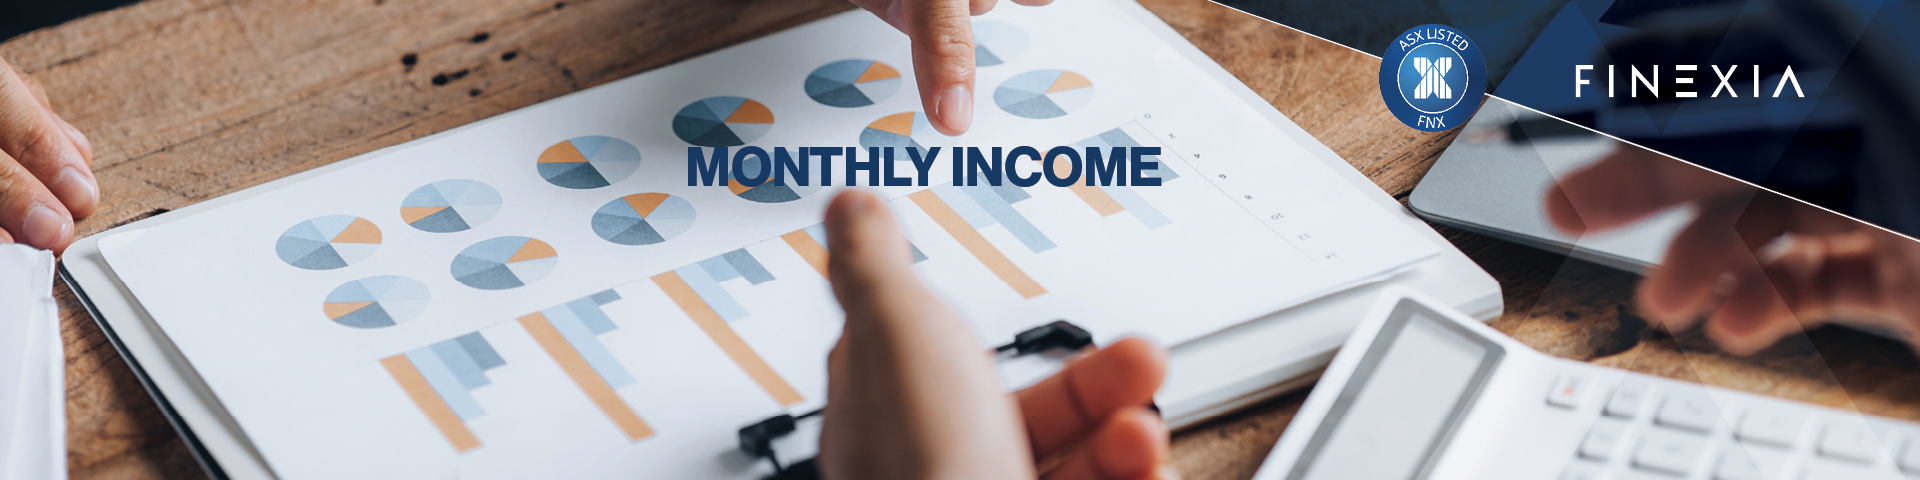 7 Powerful Investments that Pay Monthly Income in Australia